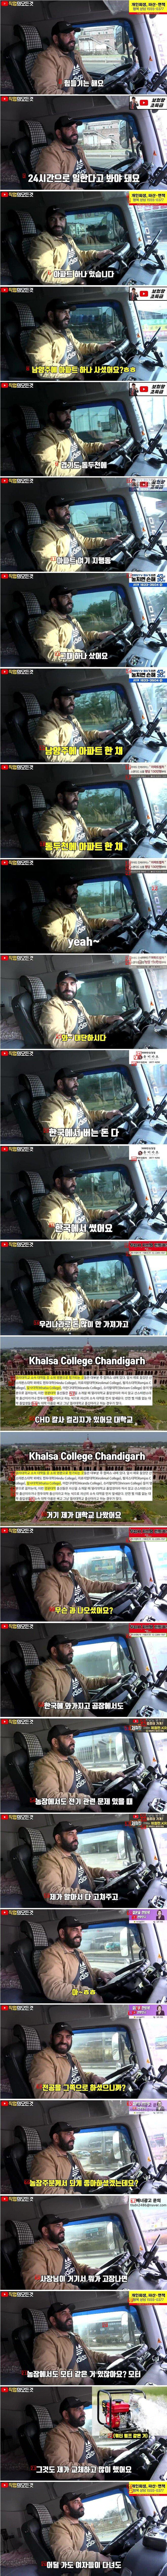 Indian-Korean who earns 2,000 won a month as a truck driver in Korea.jpg